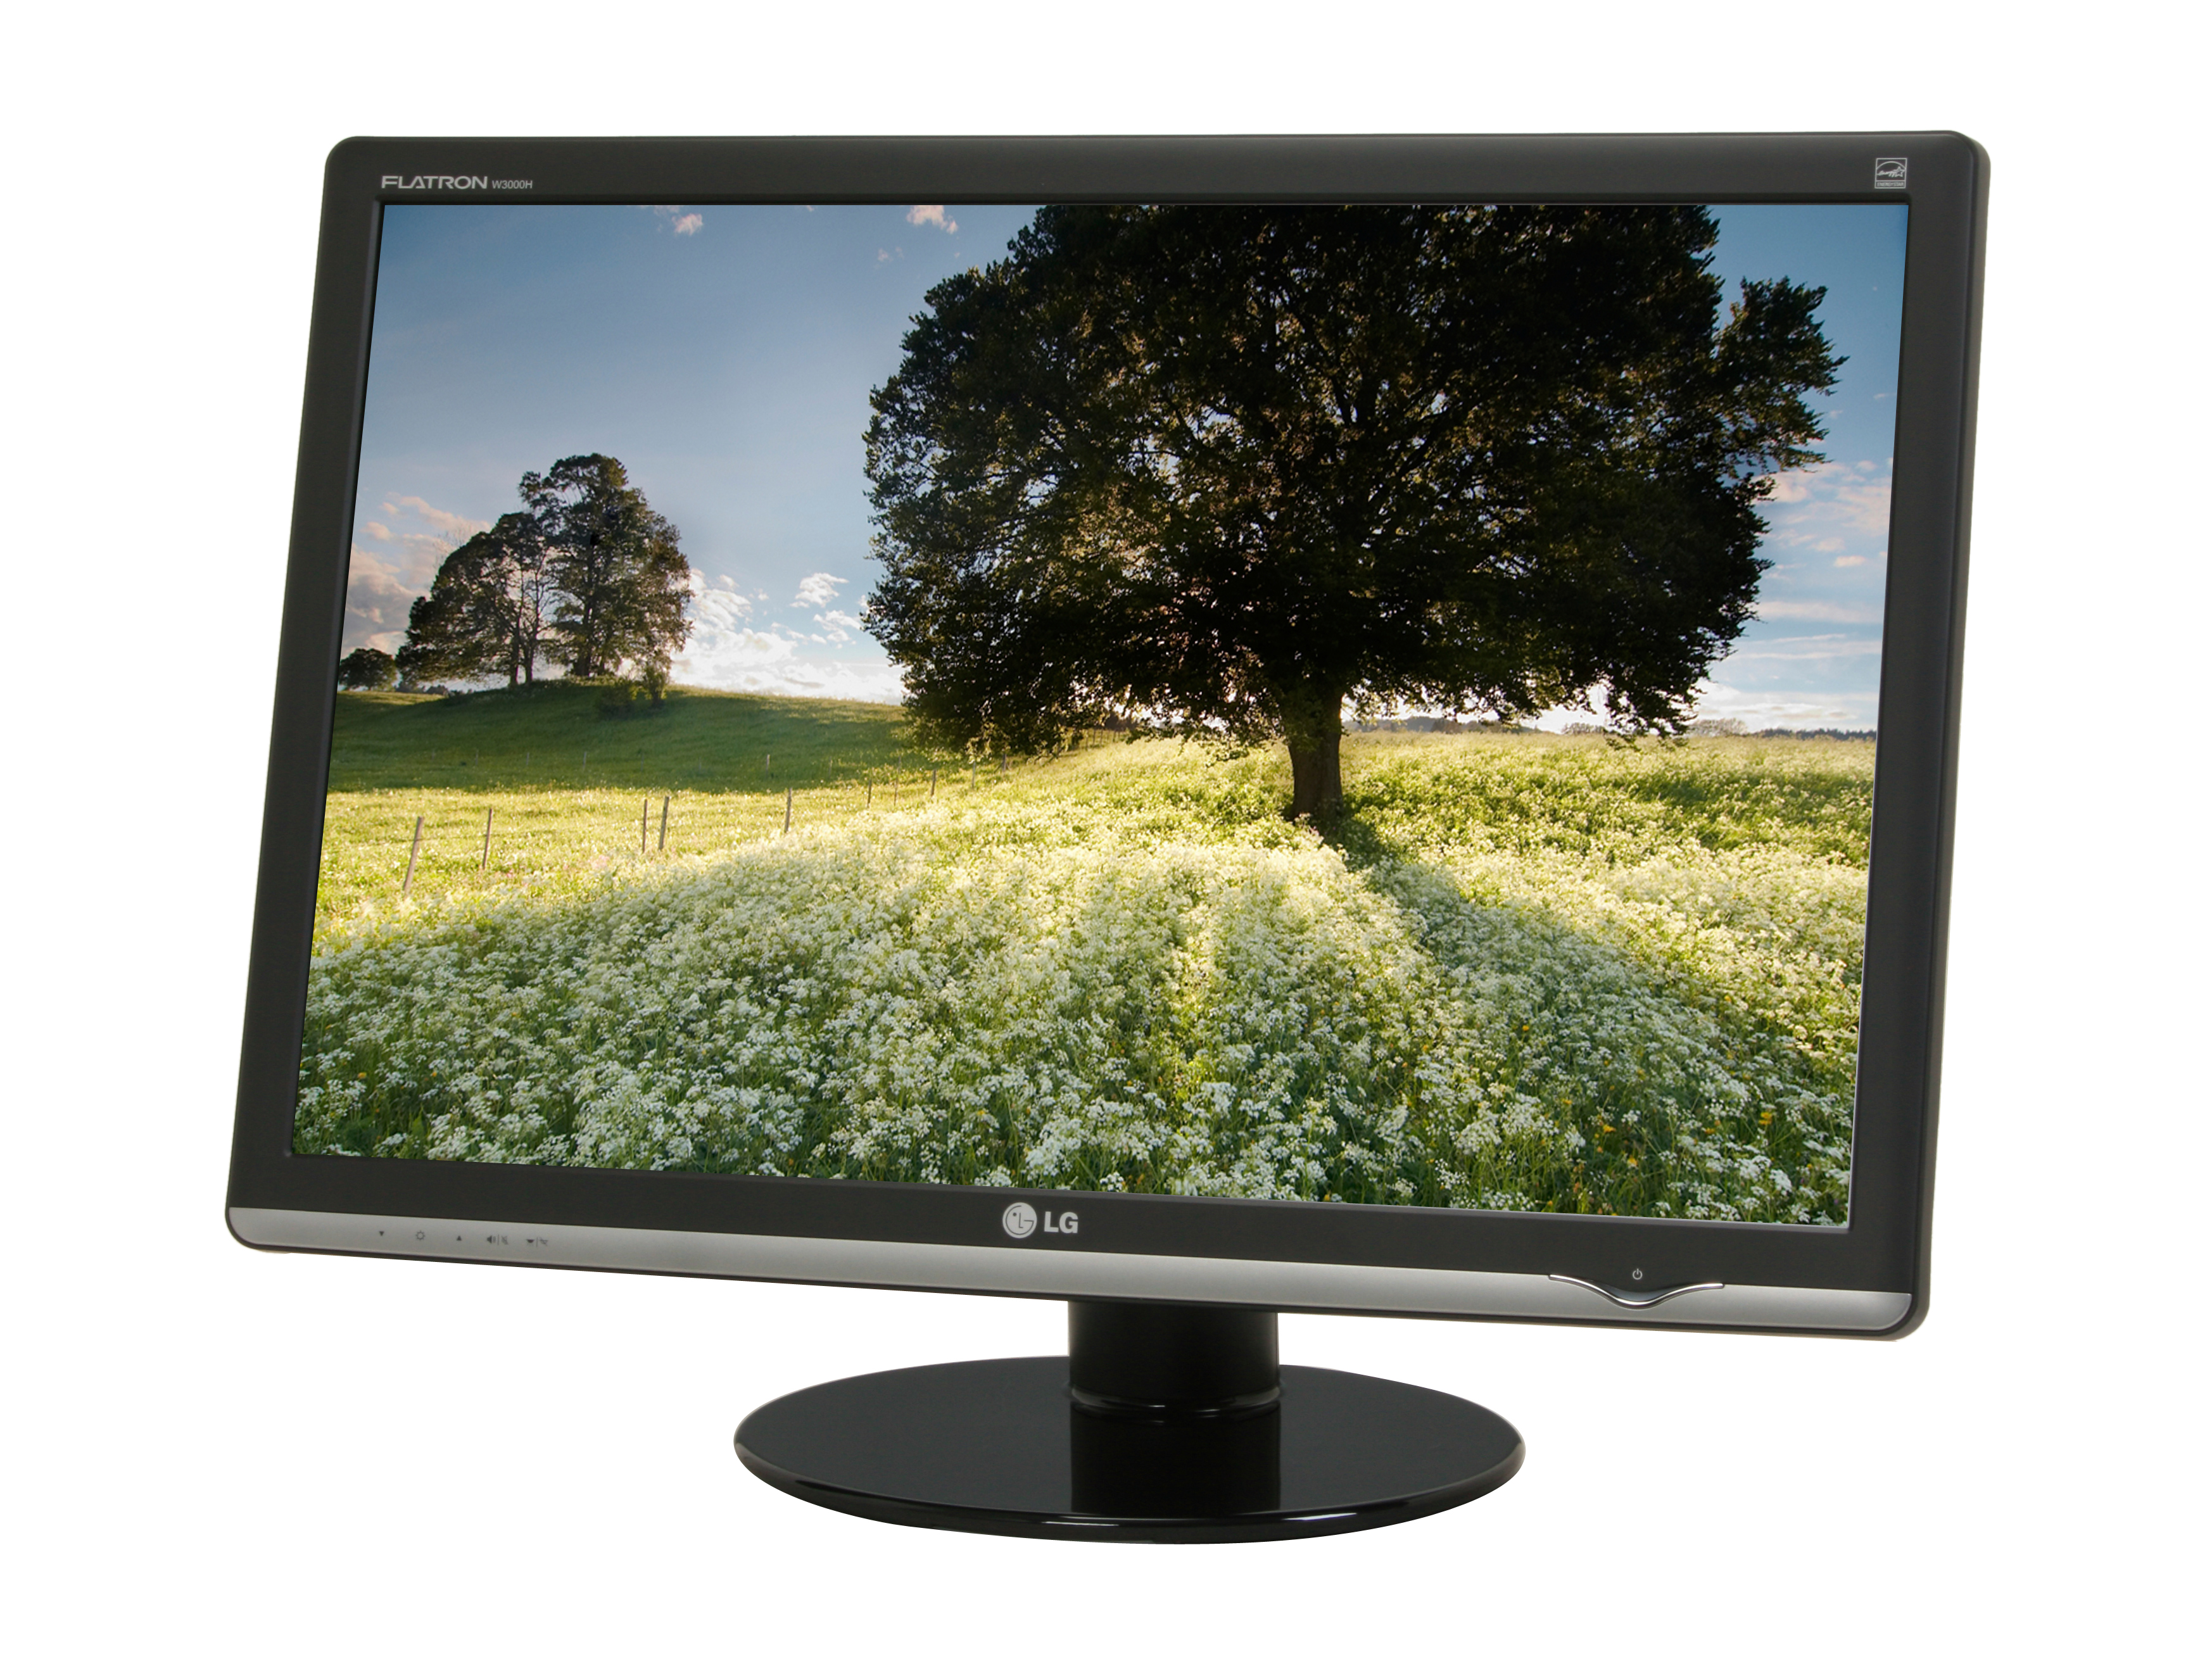 LG W3000H Bn Black 30" 5ms Widescreen LCD Monitor w/ HDCP Support 370 cd/m2 3000:1 w/ 4 USB ports